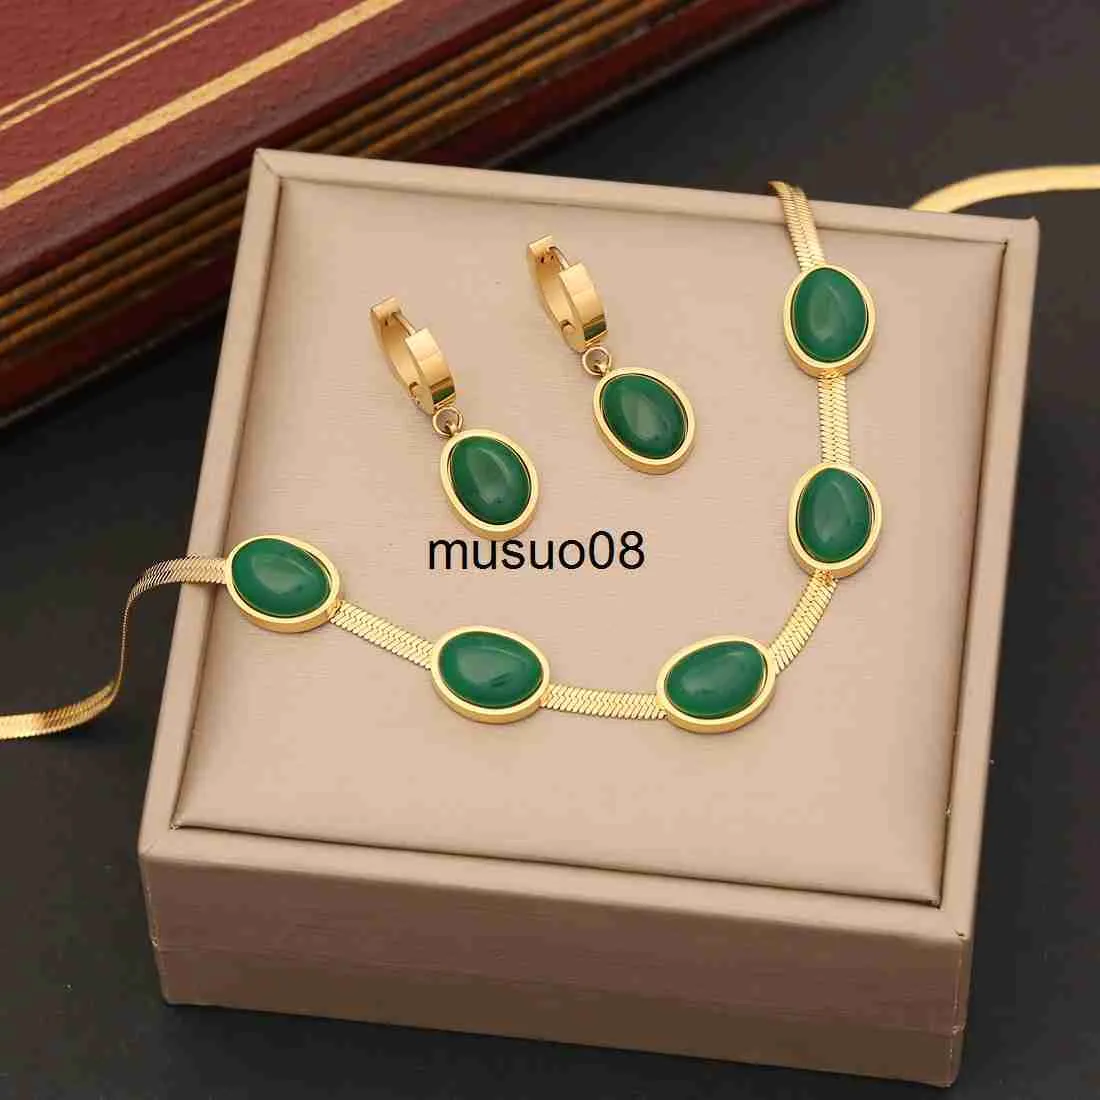 Pendant Necklaces 316L Stainless Steel Emerald Color Crystal Necklace For Women Punk Street Trend Snake Chain Choker Girls Jewelry Gifts J230601